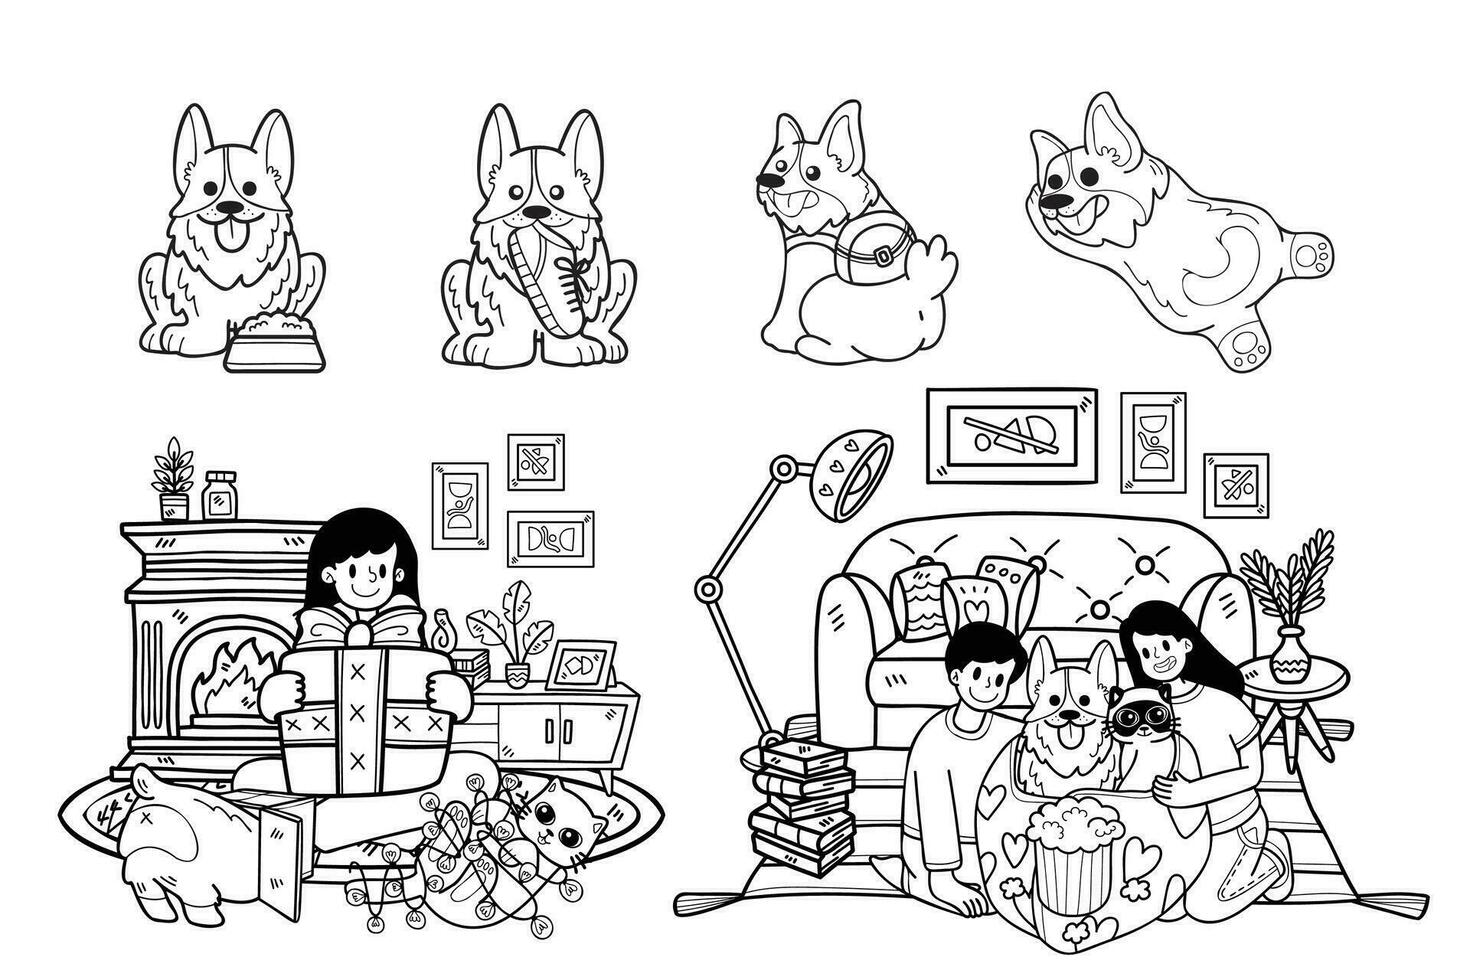 Hand Drawn dog and family collection in flat style illustration for business ideas vector